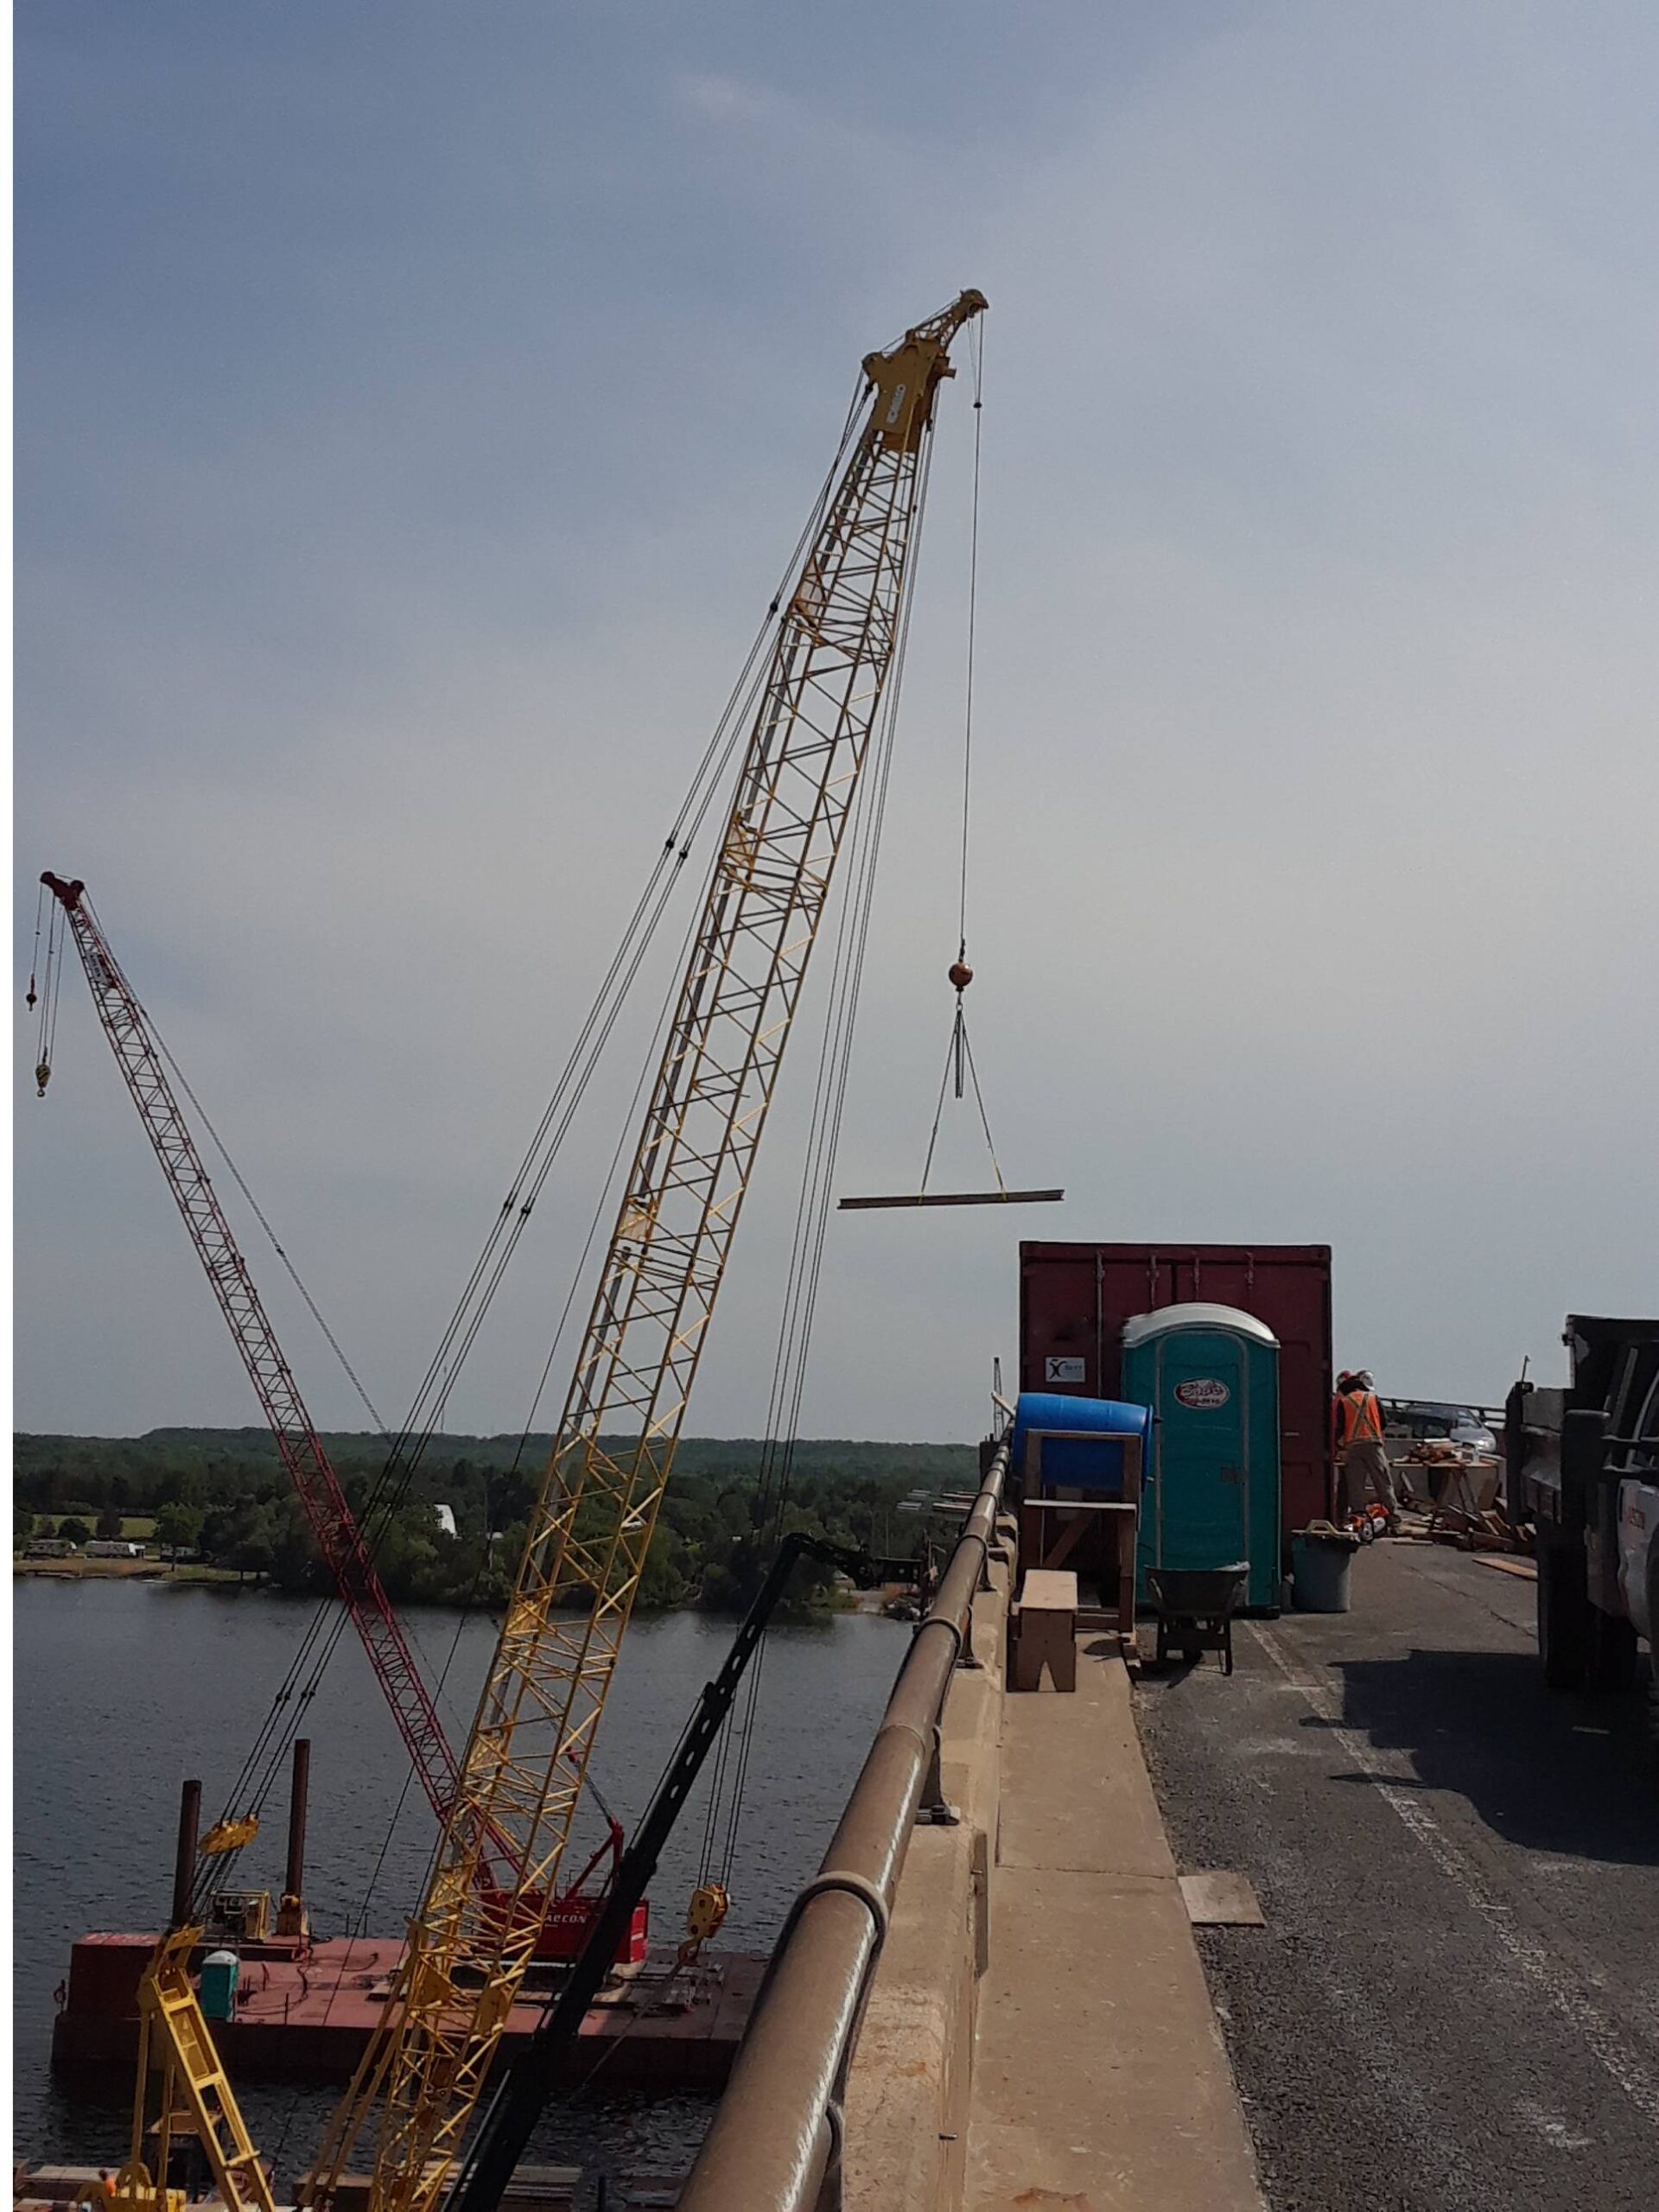 Lifting materials from the barge to the deck